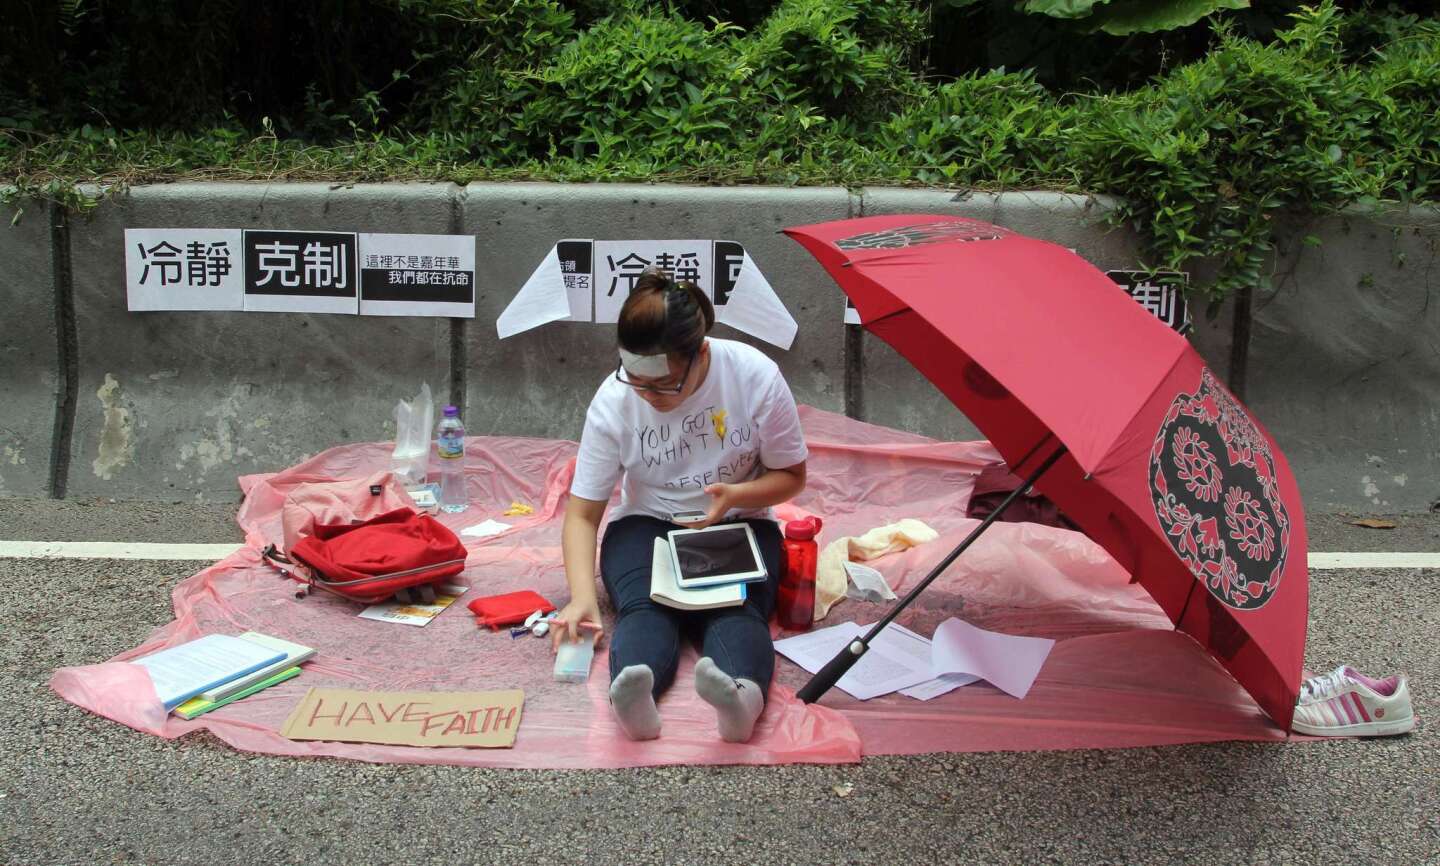 A pro-democracy protestor sits in the road near the Hong Kong government headquarters.